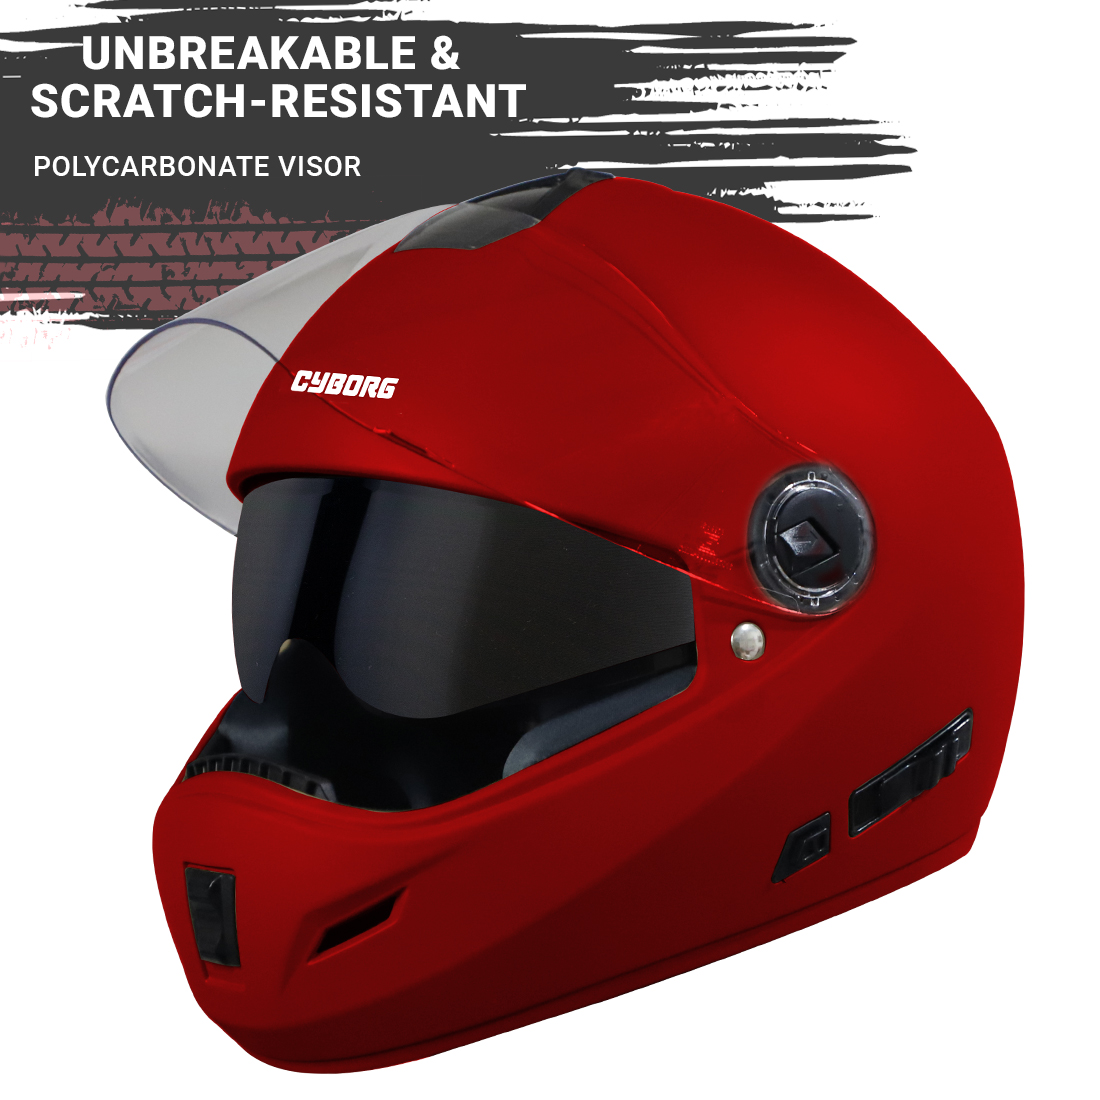 Steelbird SB-39 Cyborg ISI Certified Full Face Helmet For Men And Women With Sun Shield (Glossy Cherry Red)